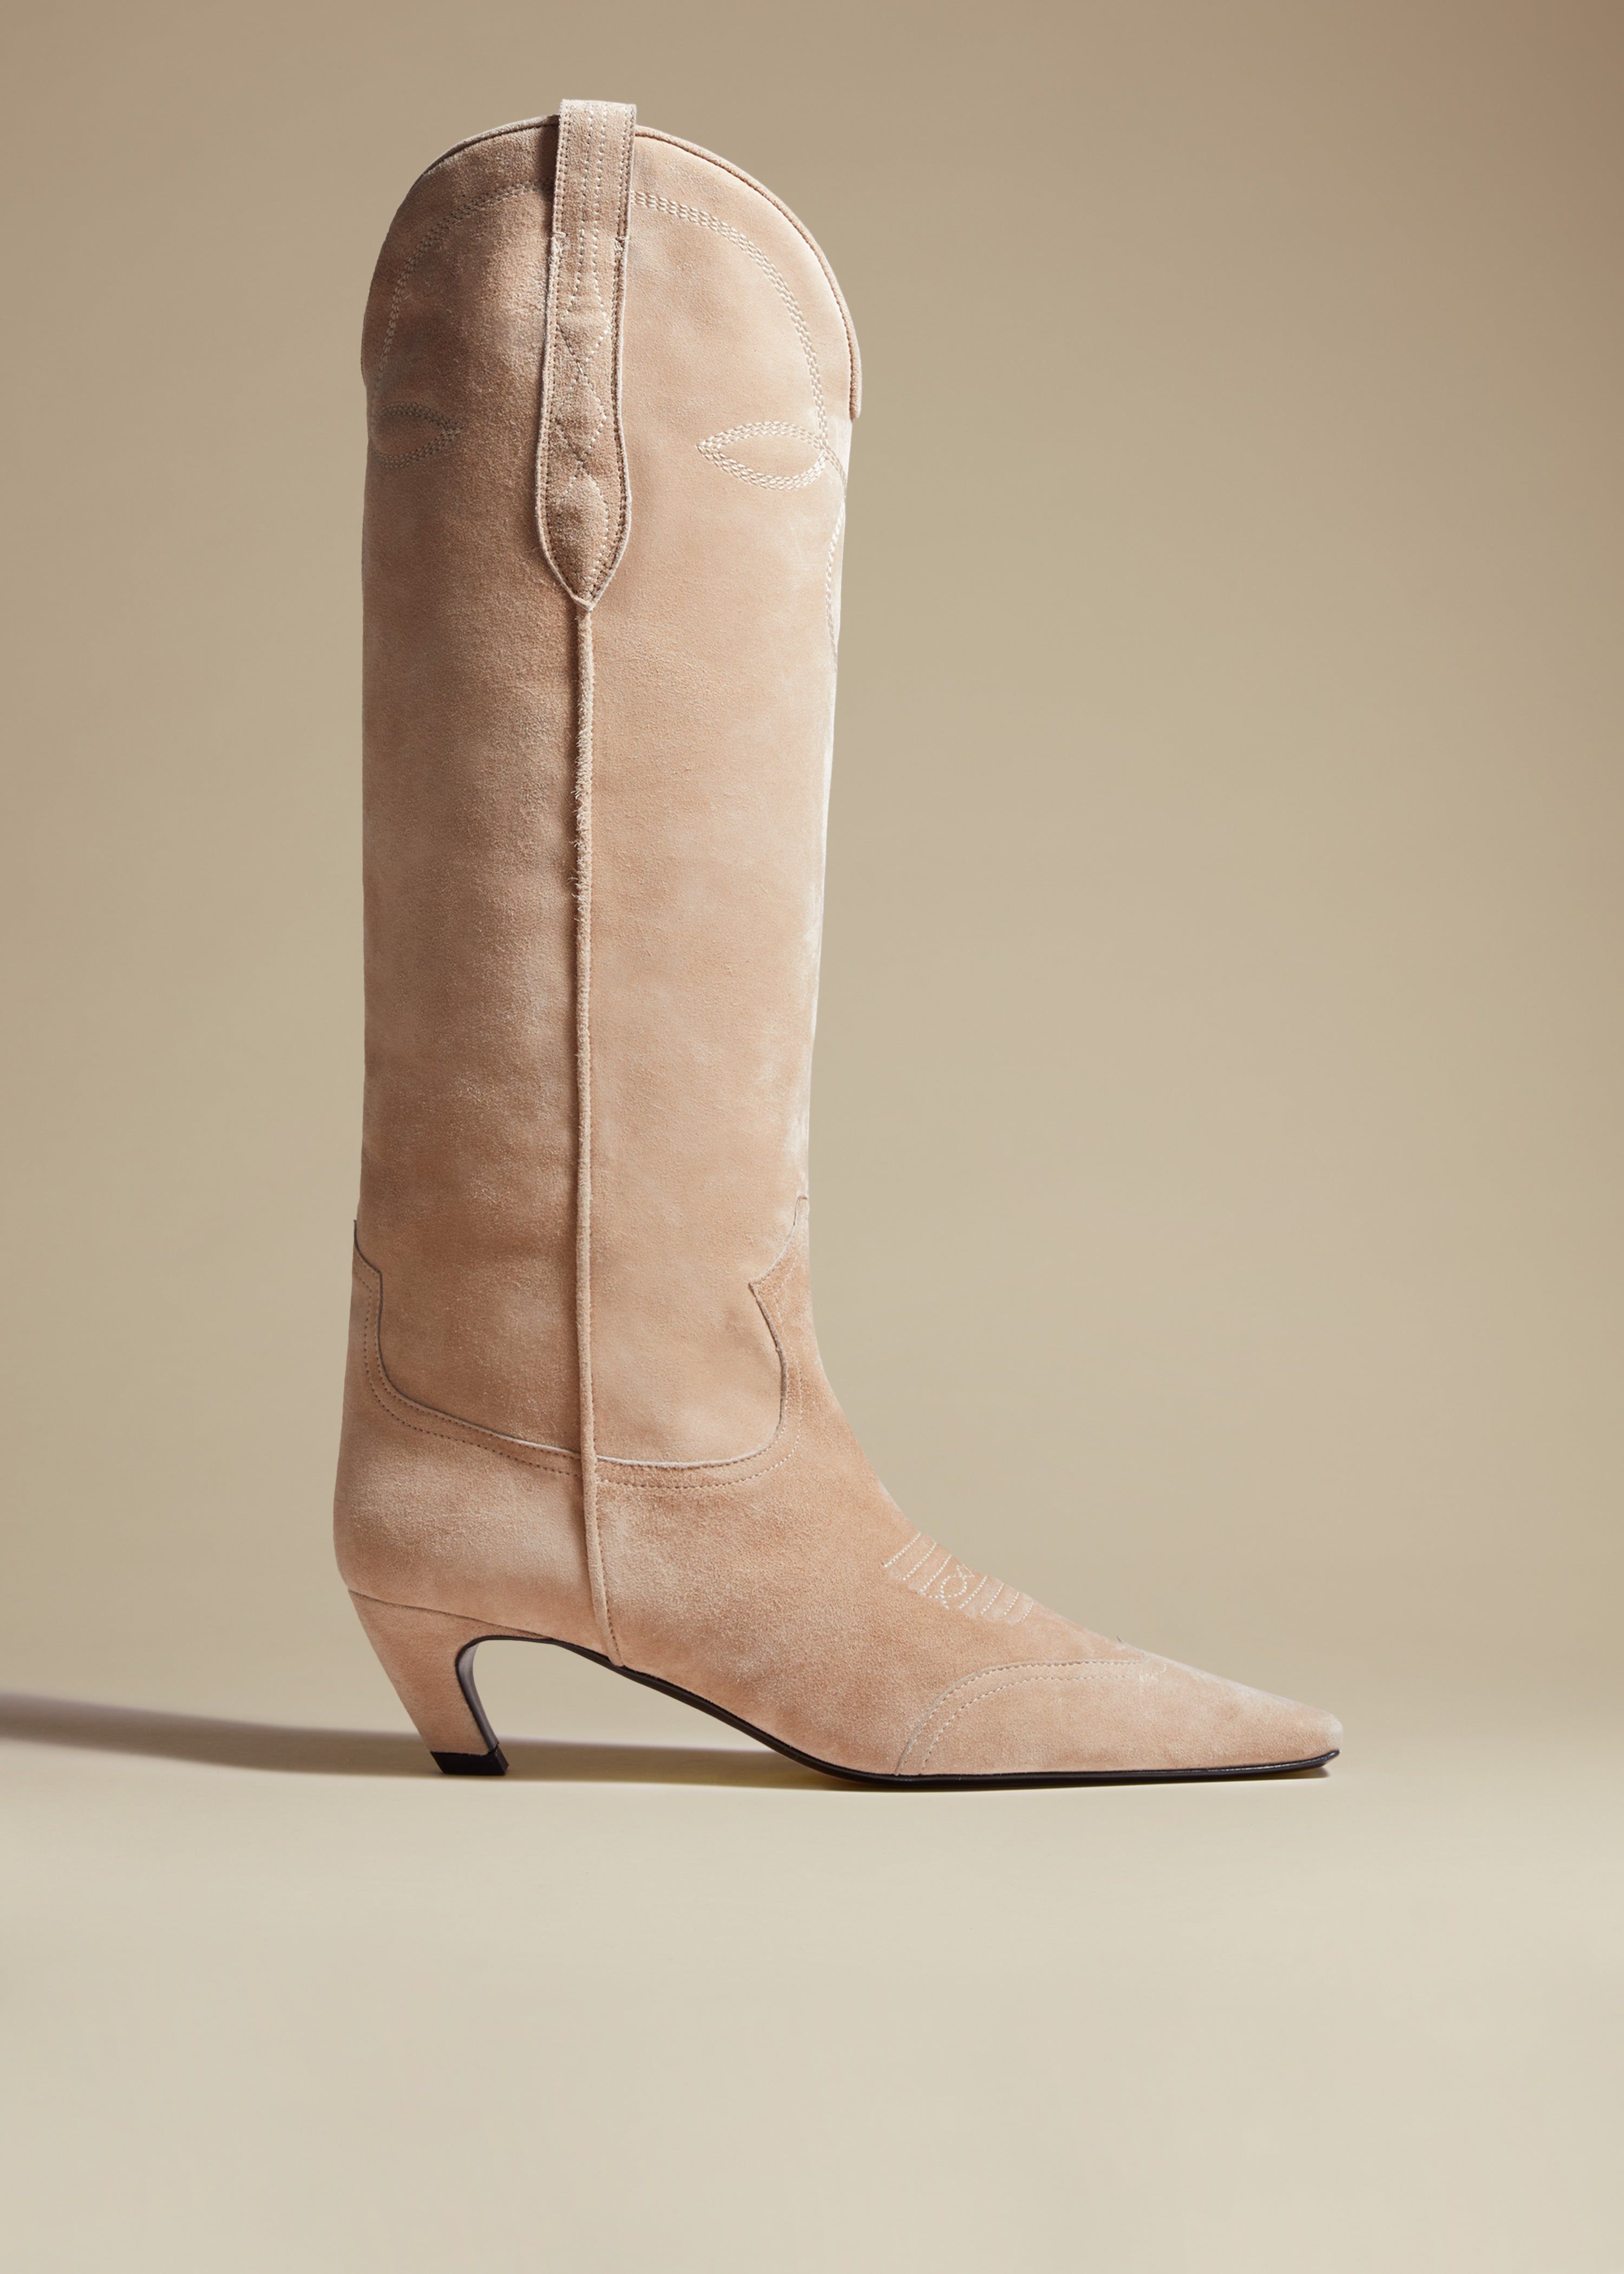 THE DALLAS KNEE HIGH BOOT